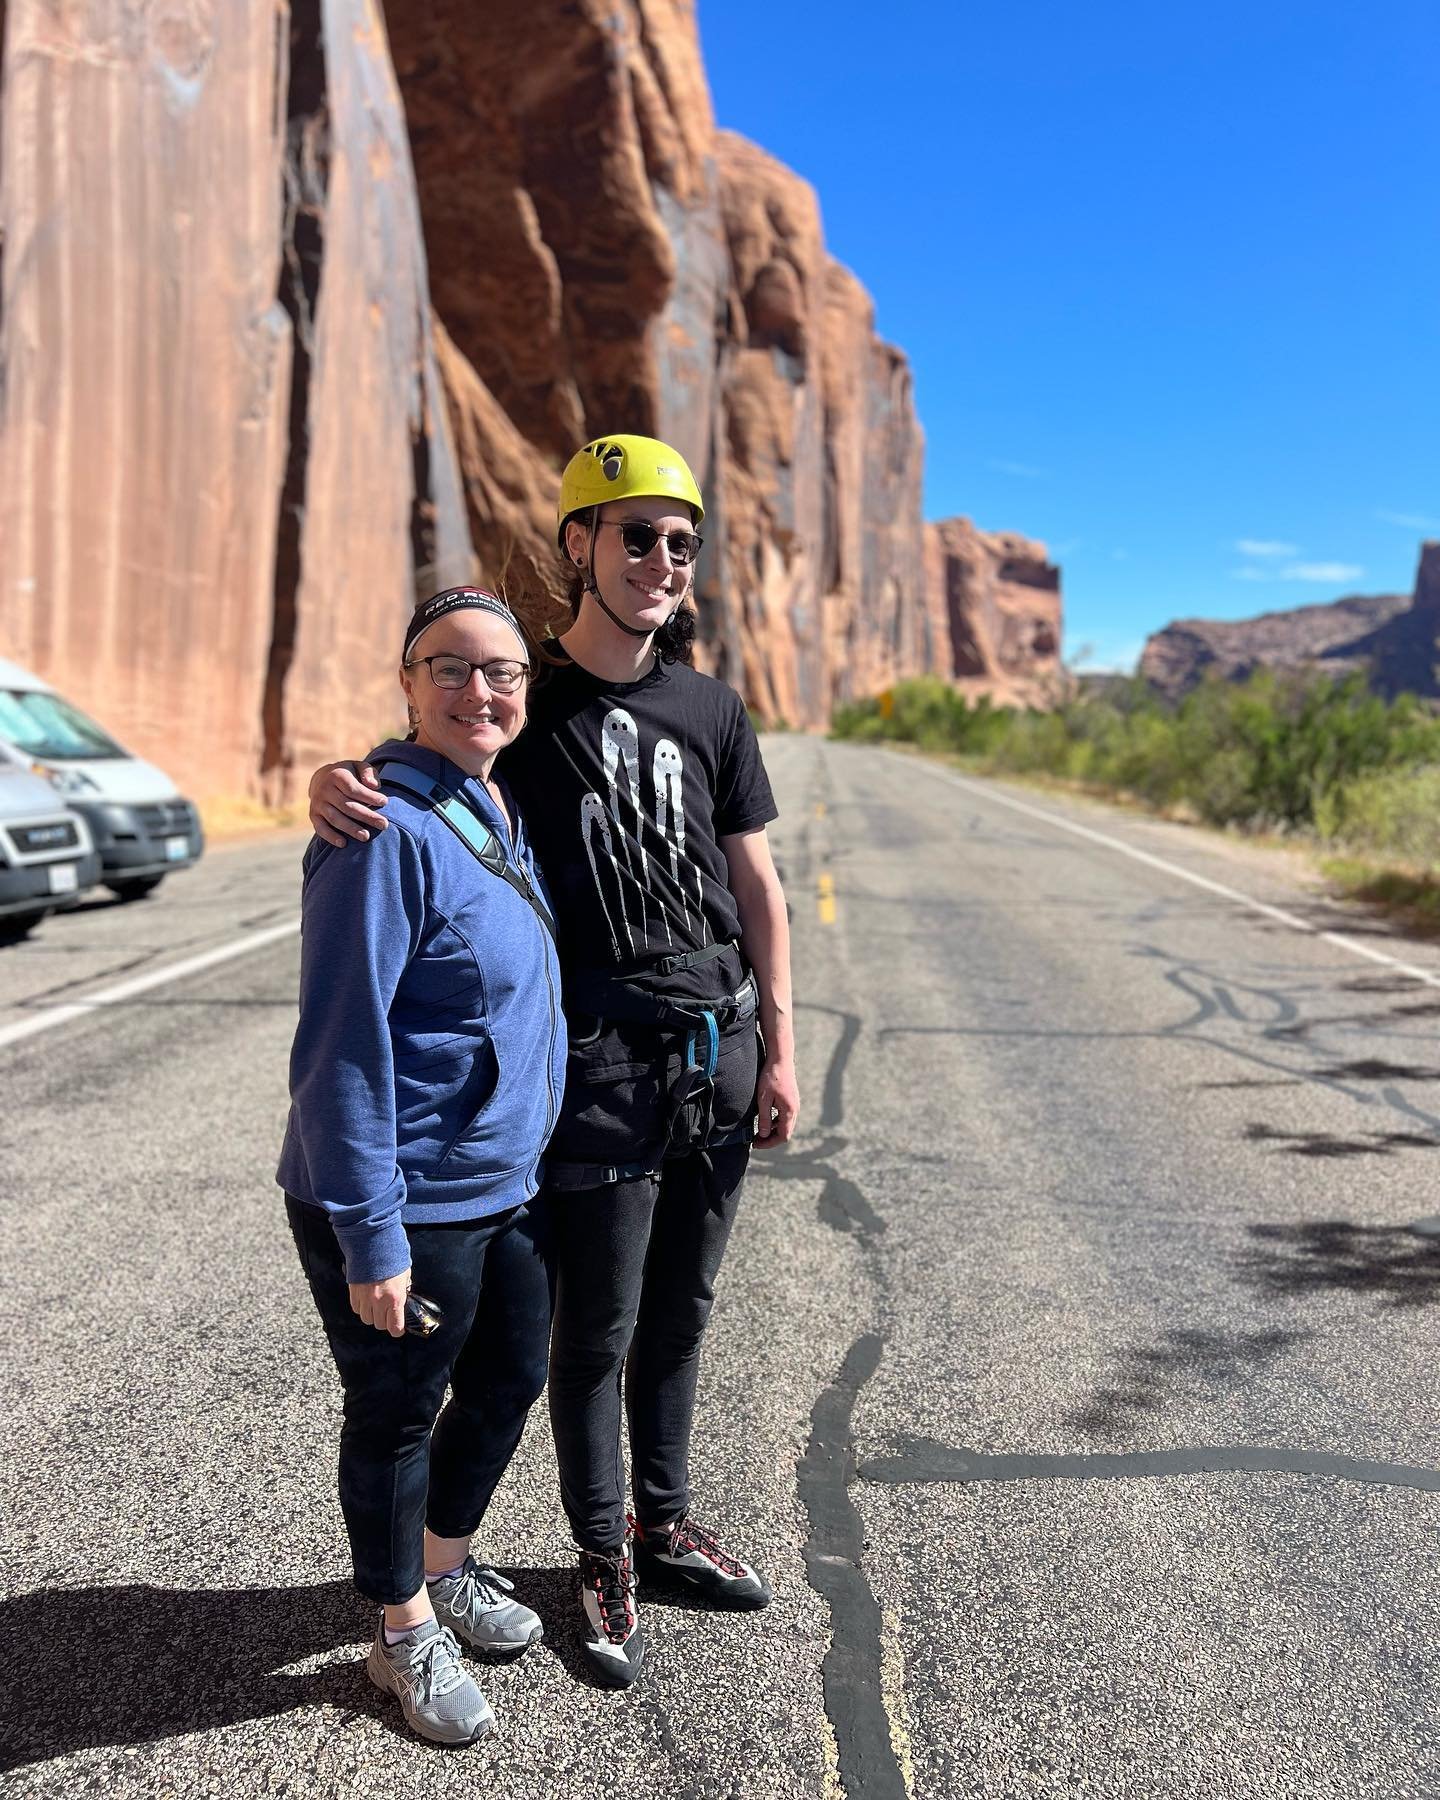 Erica and Jack (mom and son) are having the best roadtrip while visiting Moab. Jack took his indoor crack climbing skills to the desert sandstone walls. He rocked it! As I say, there is not a day of climbing in which you are not learning. The excitin